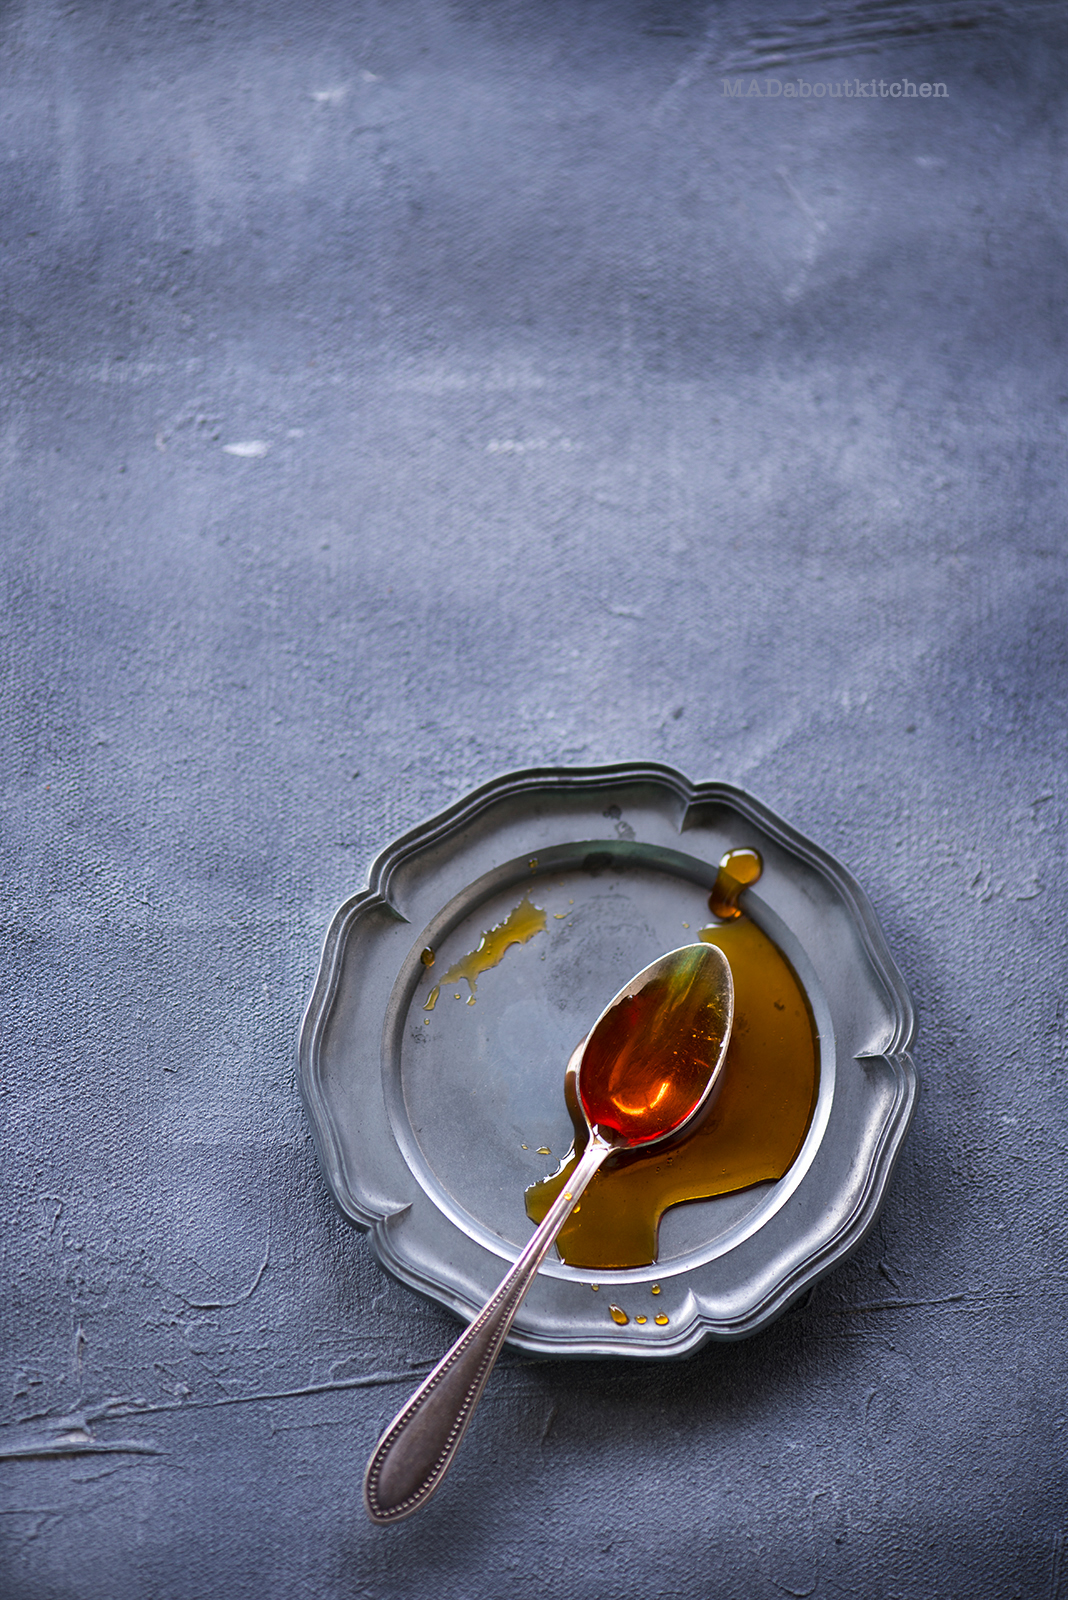 Caramel Syrup, is made by caramelising sugar. Caramel Syrup resembles Honey or Maple Syrup and is a basic syrup that is vastly used in desserts.